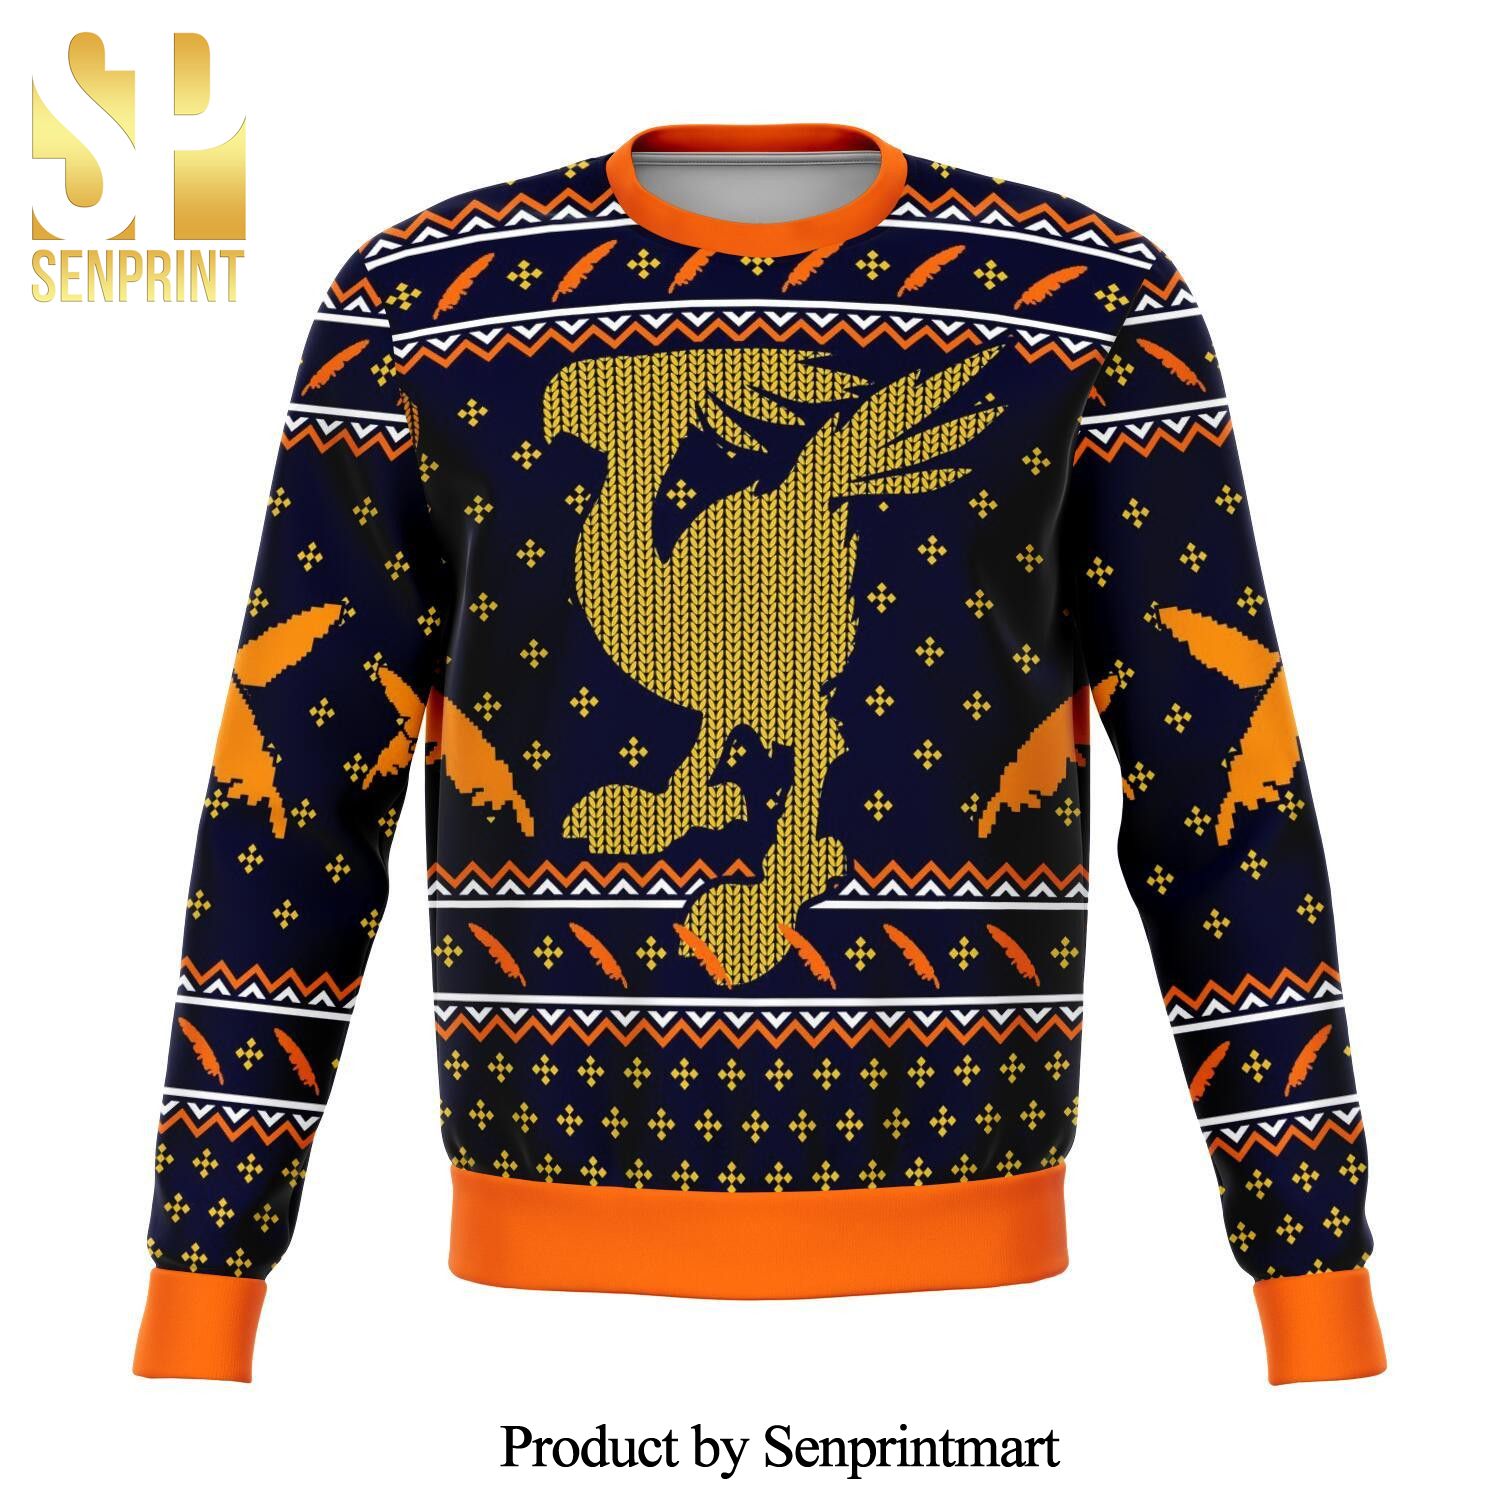 Final Fantasy Chocobo Premium Knitted Ugly Christmas Sweater